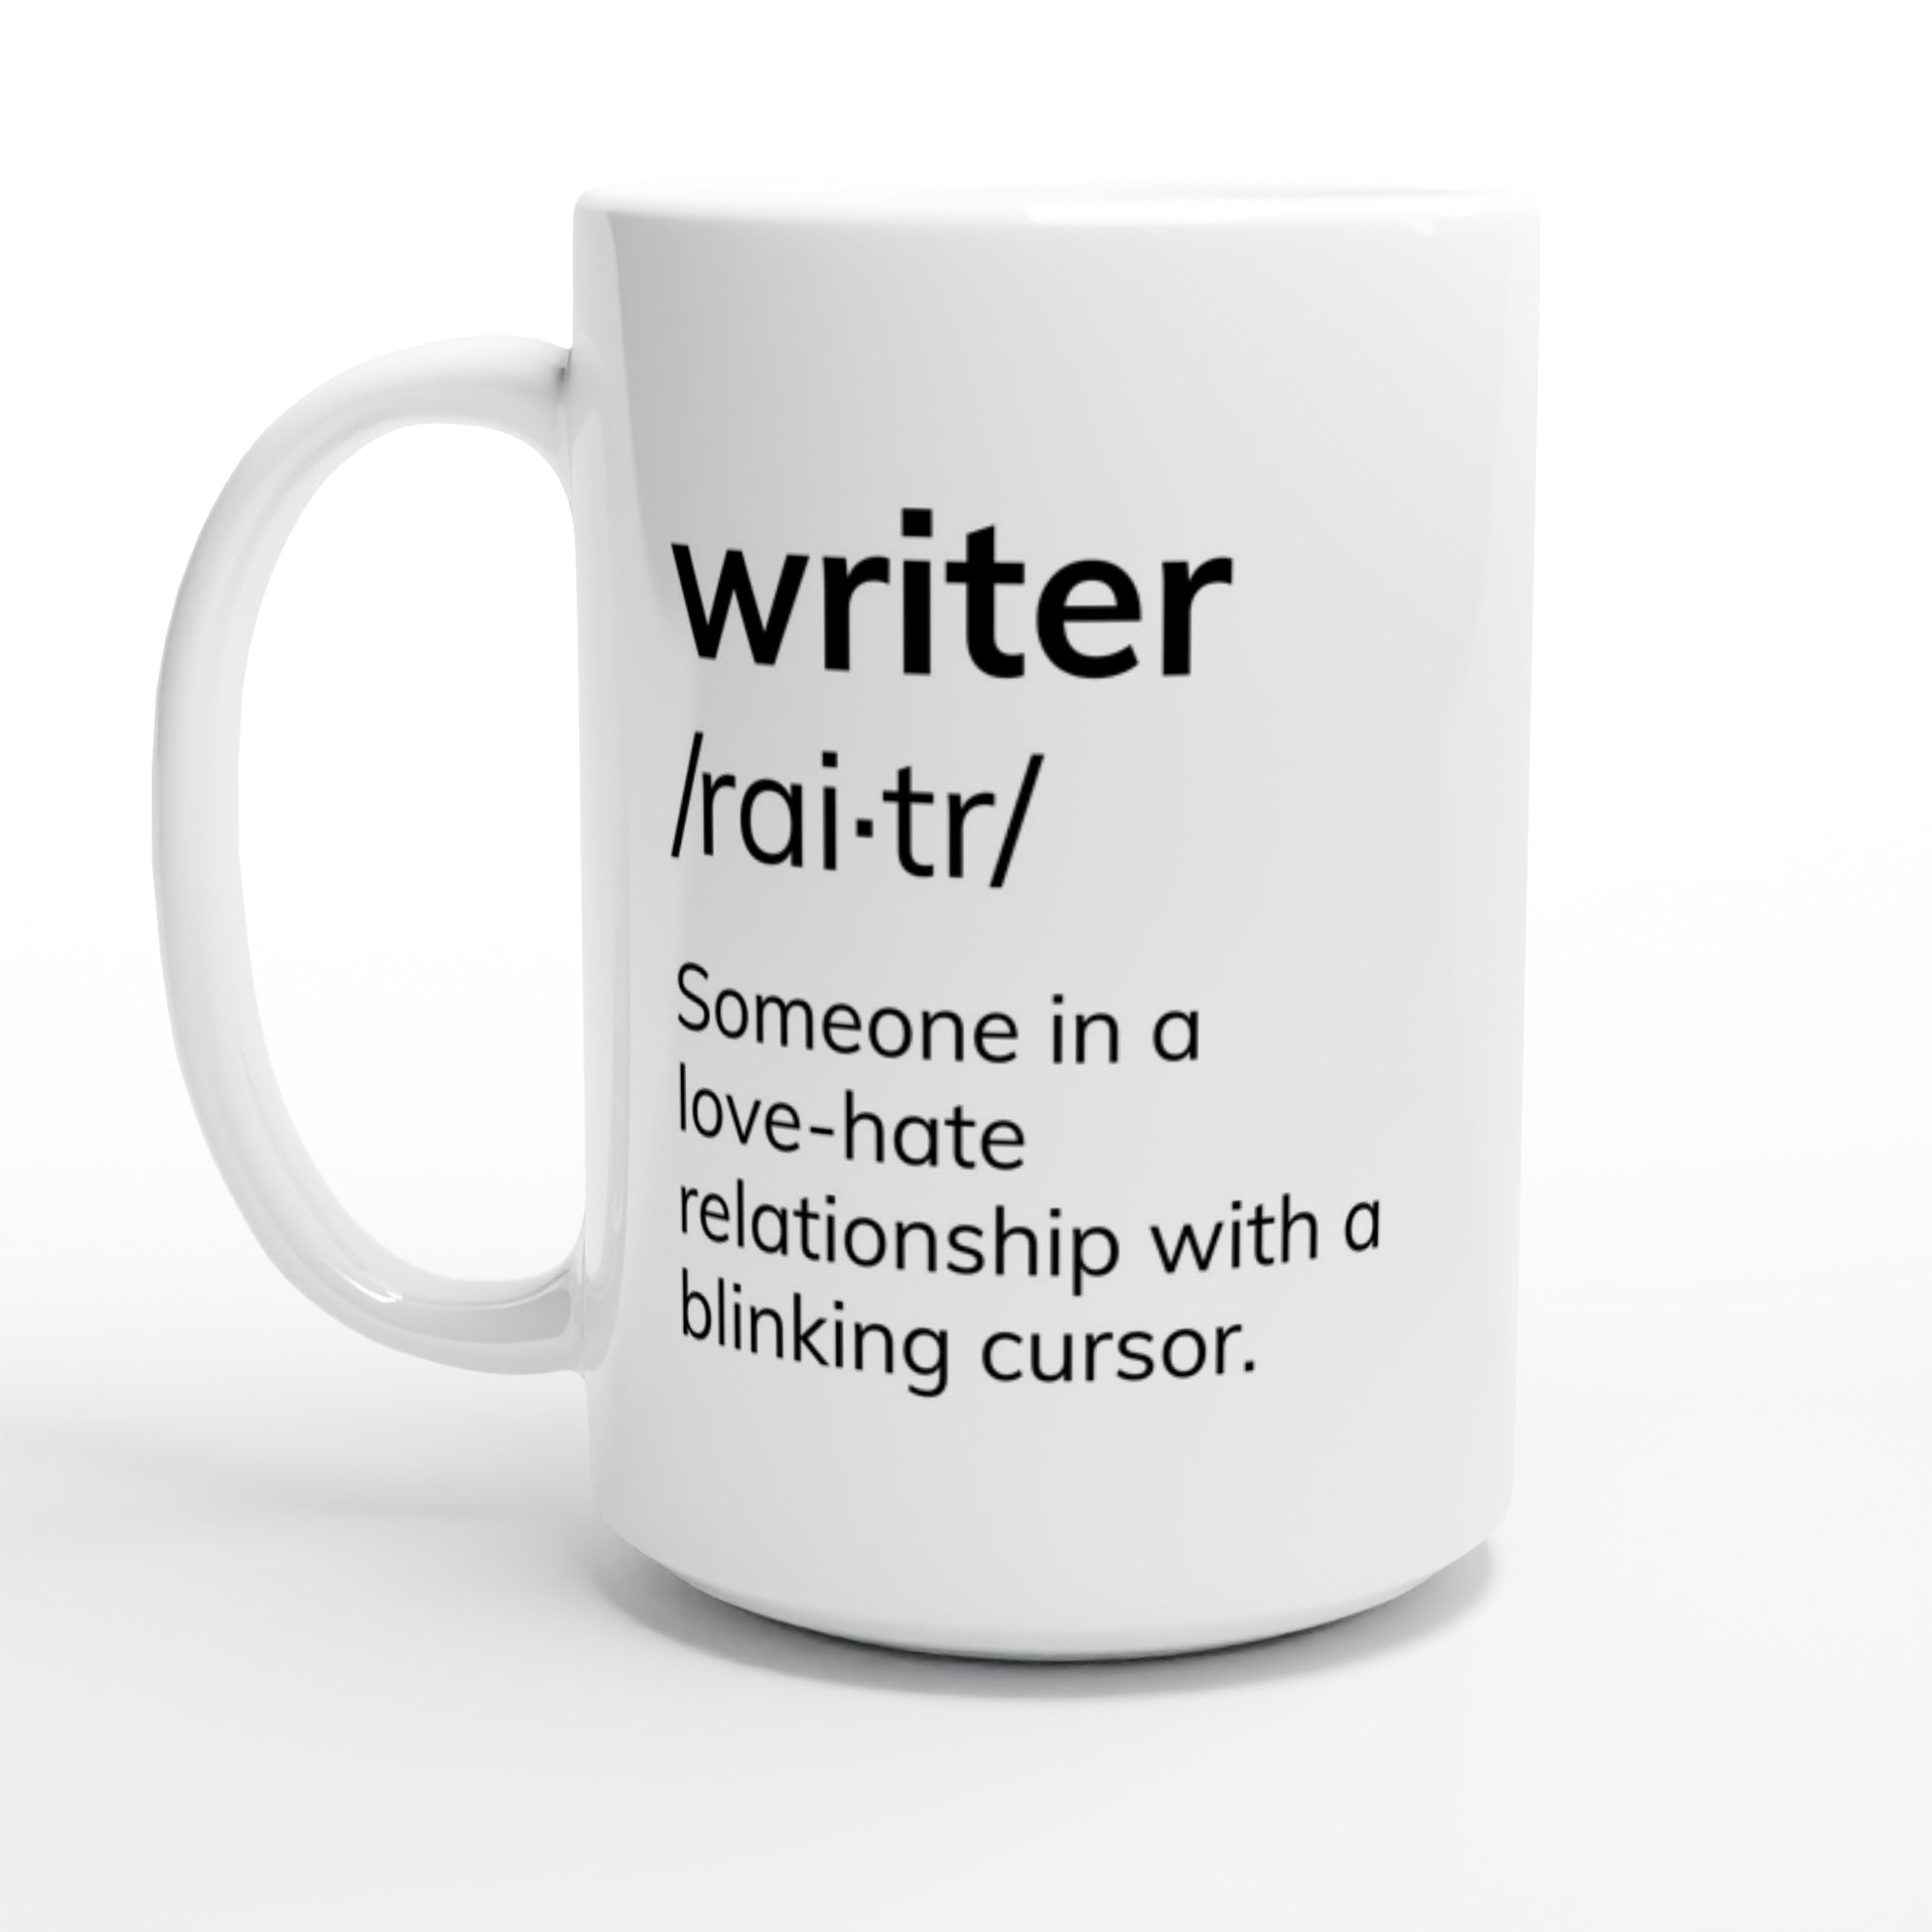 A white mug with the words "Writer: Someone in a love-hate relationship with a blinking cursor" and a blinking cursor.